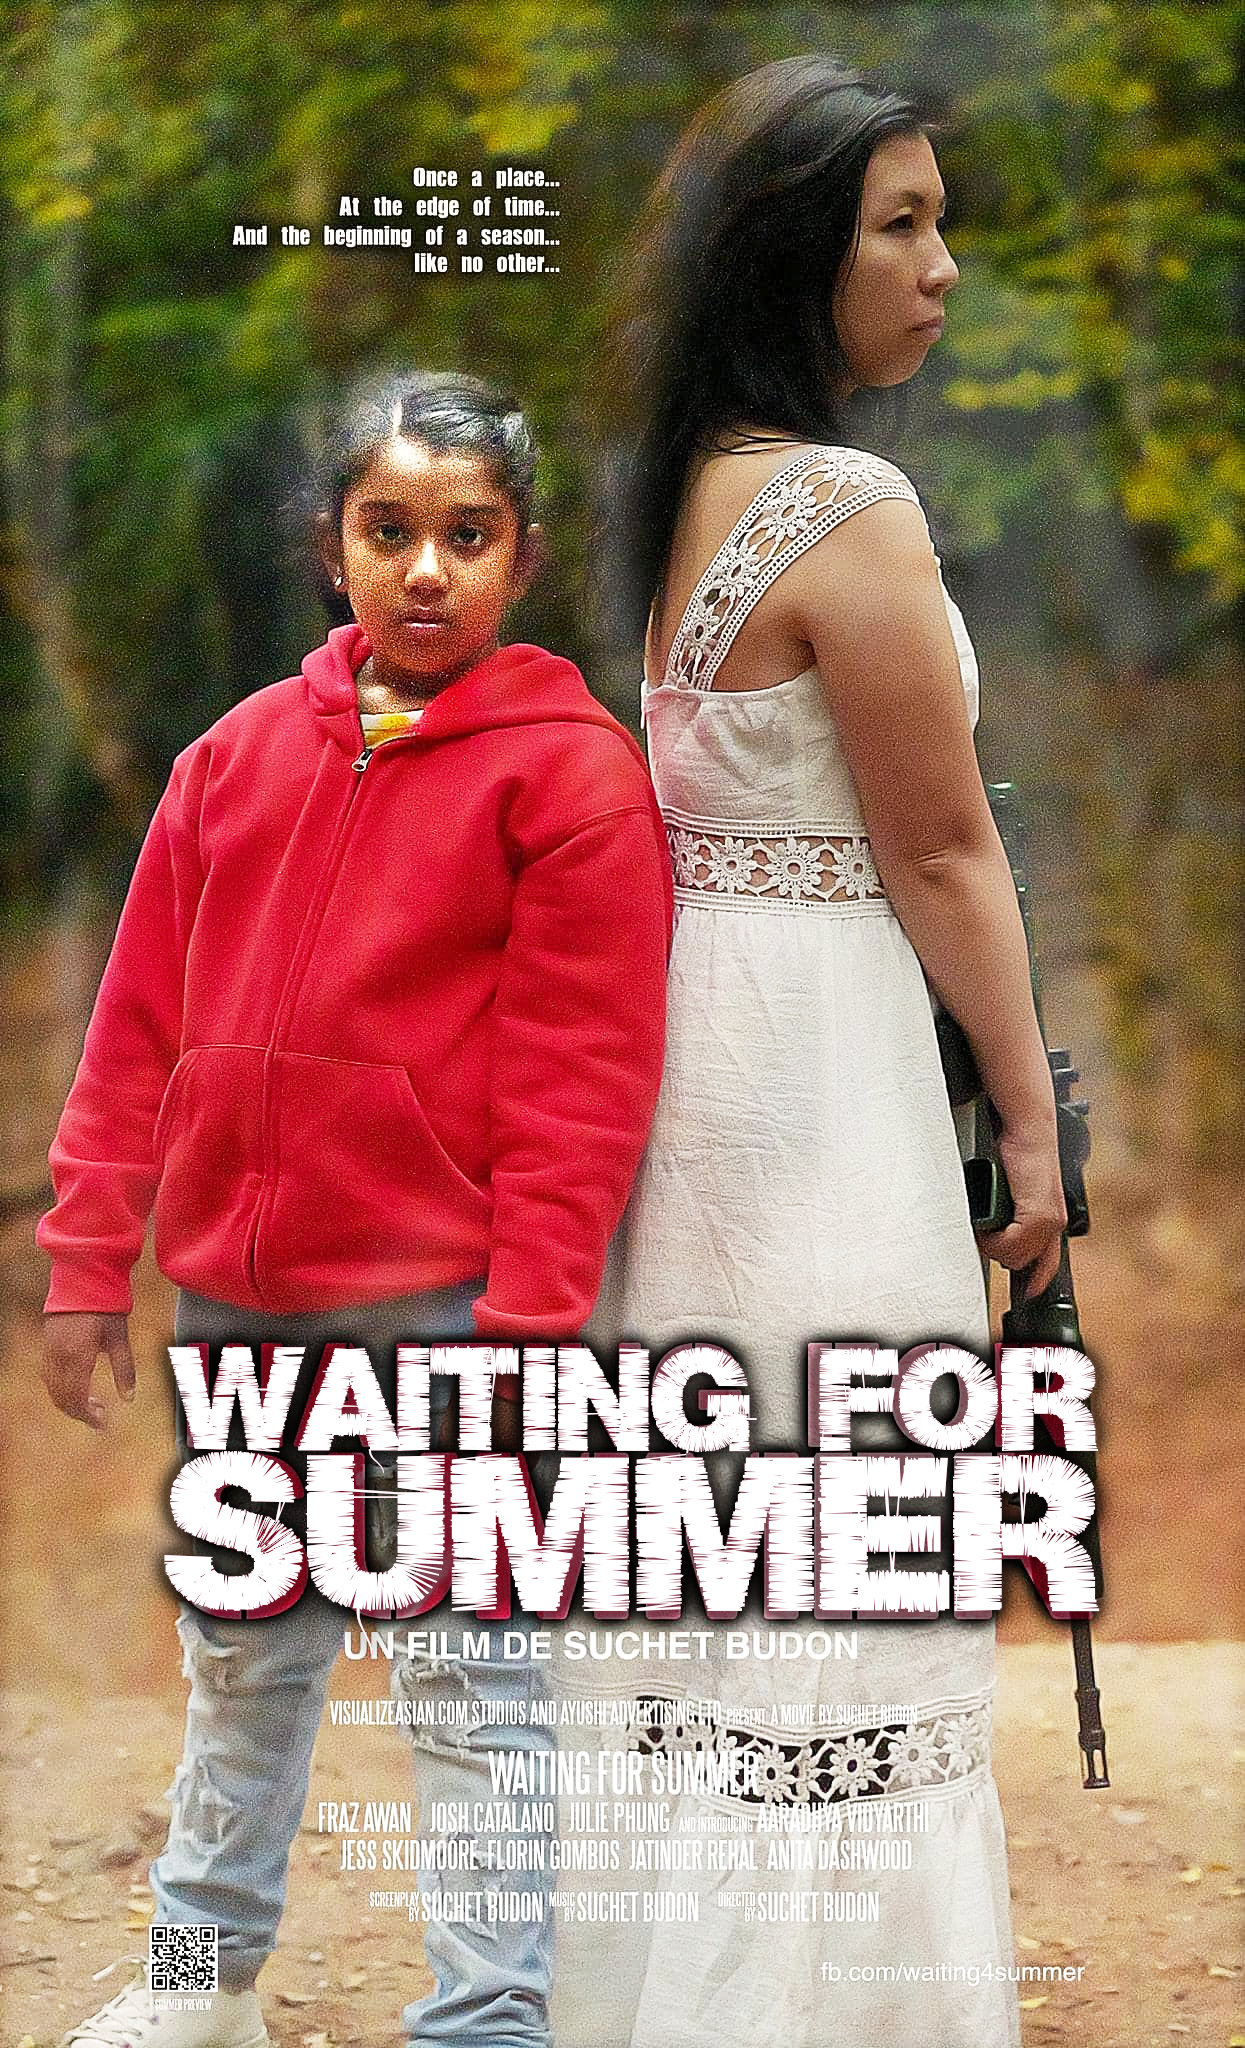 Waiting for Summer movie poster in the style of a 70s female thriller